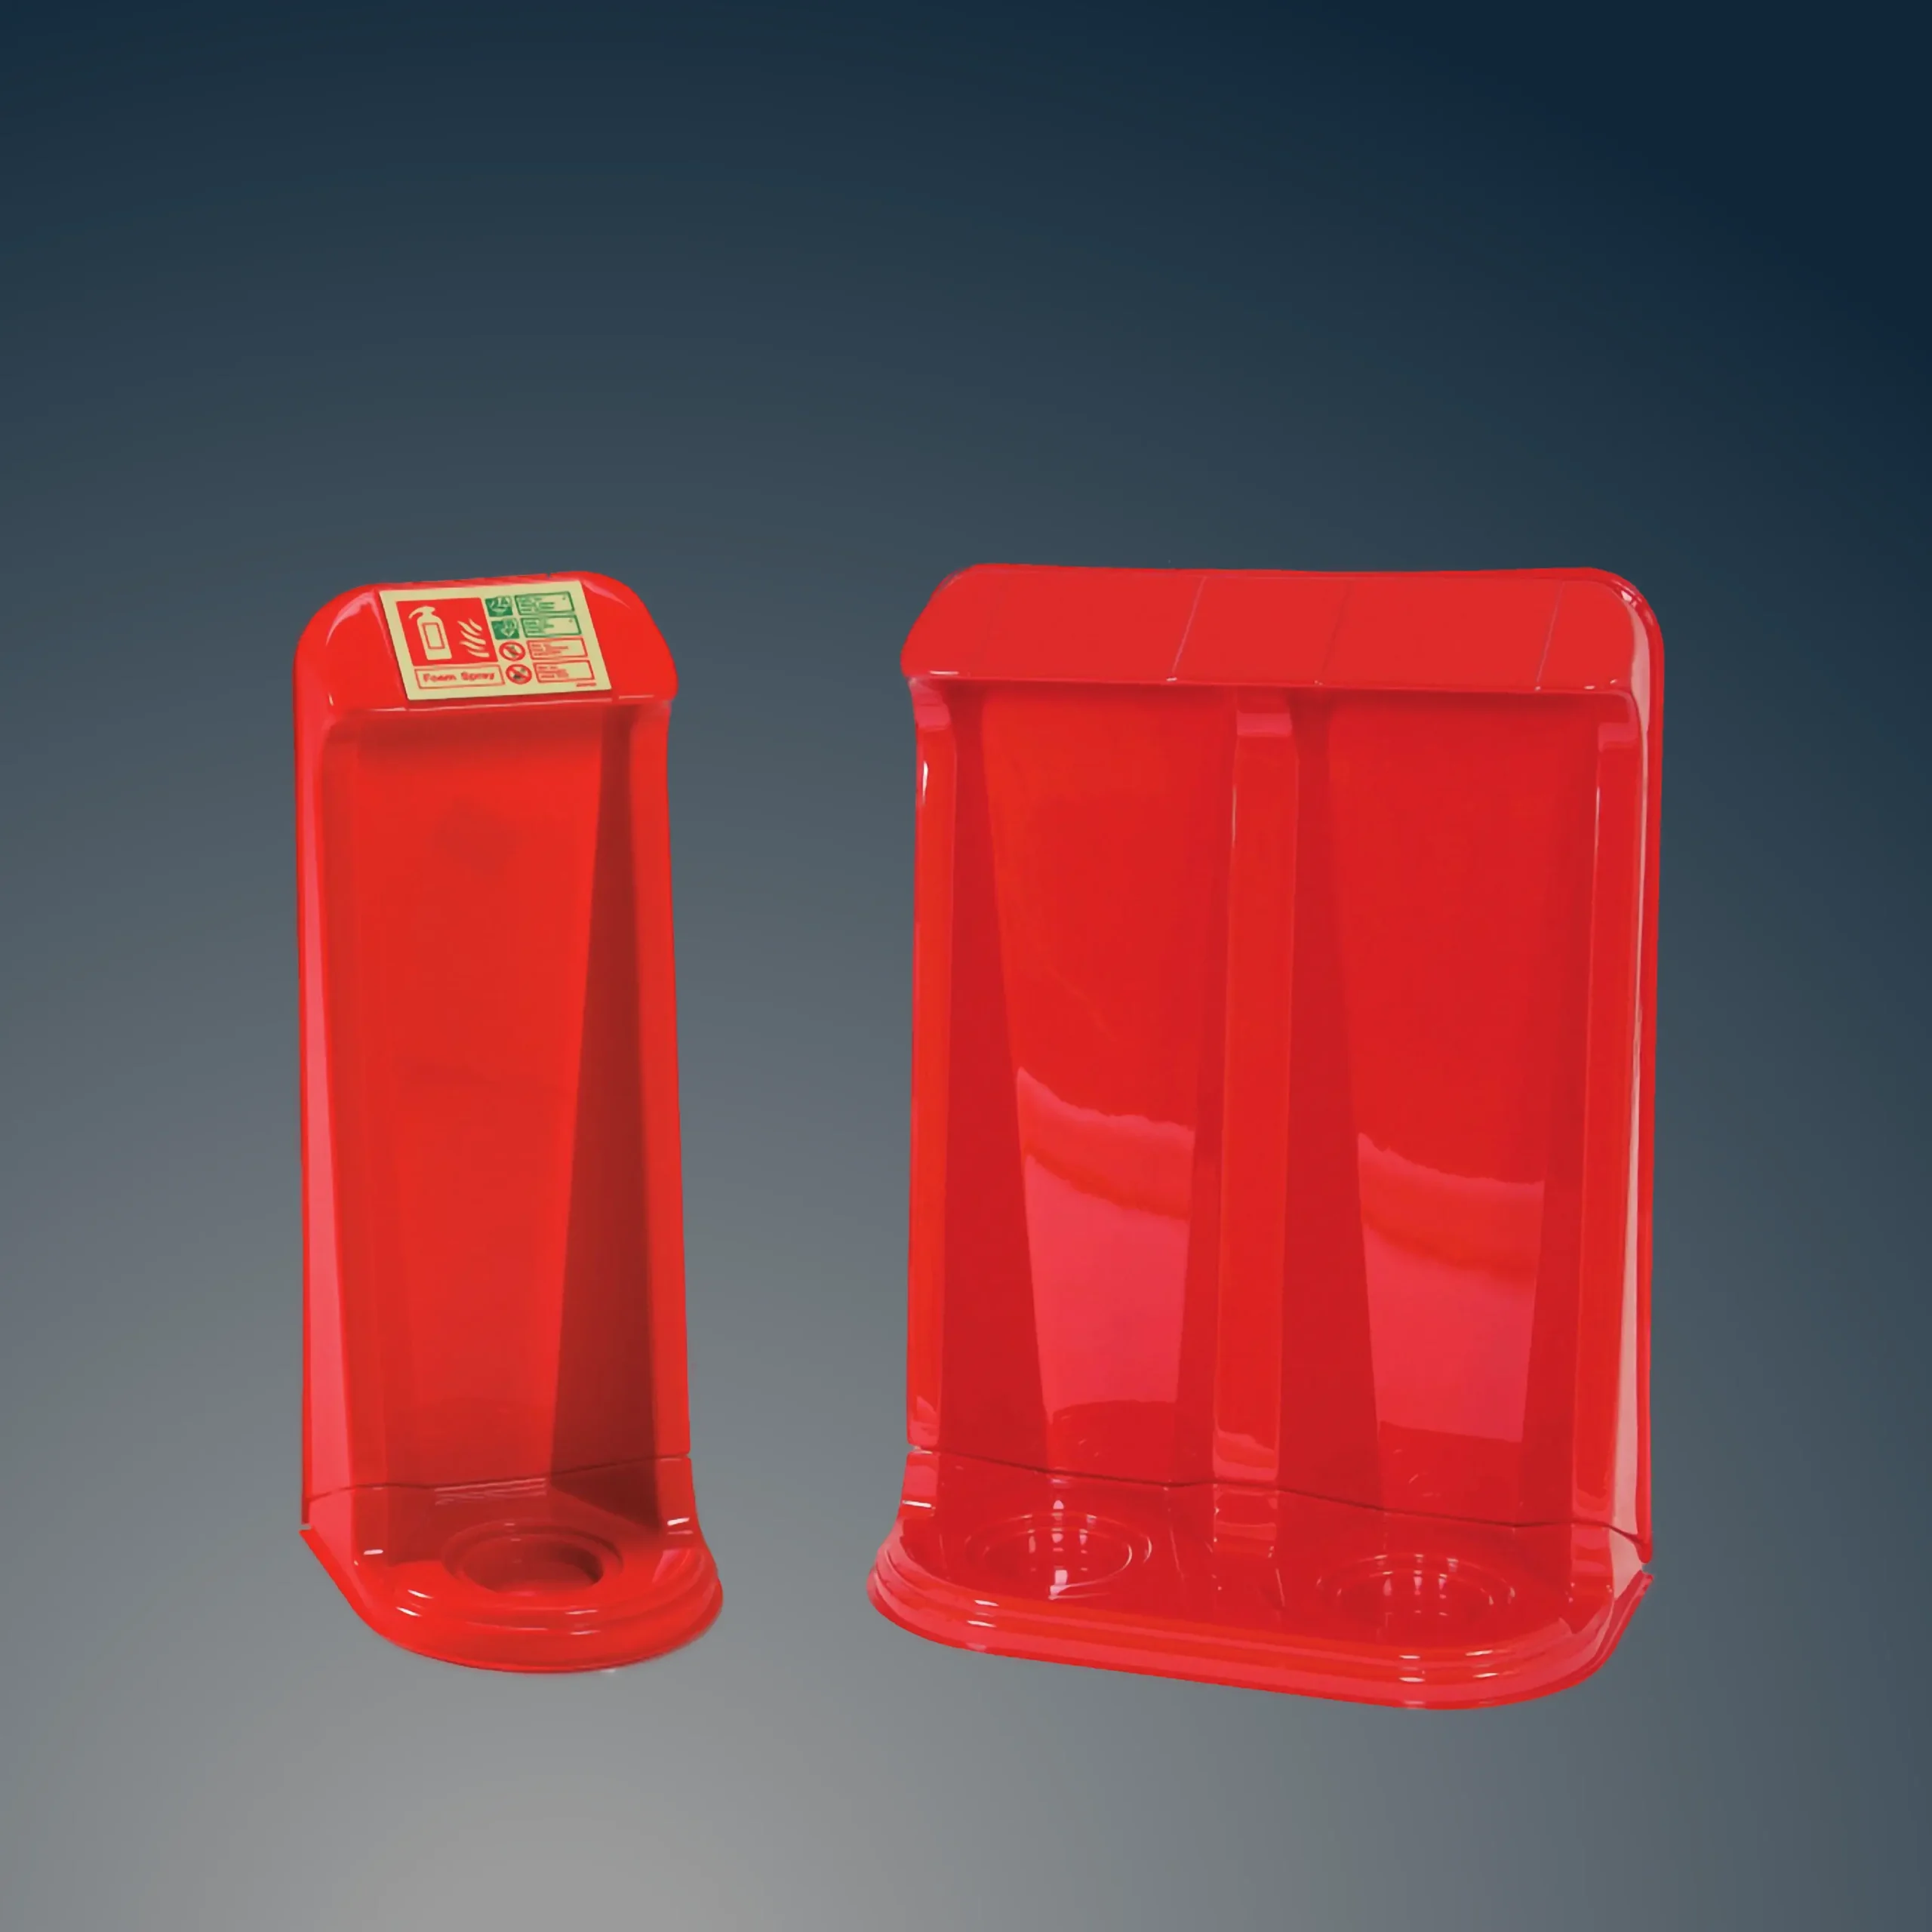 Suppliers of Extinguisher Stands